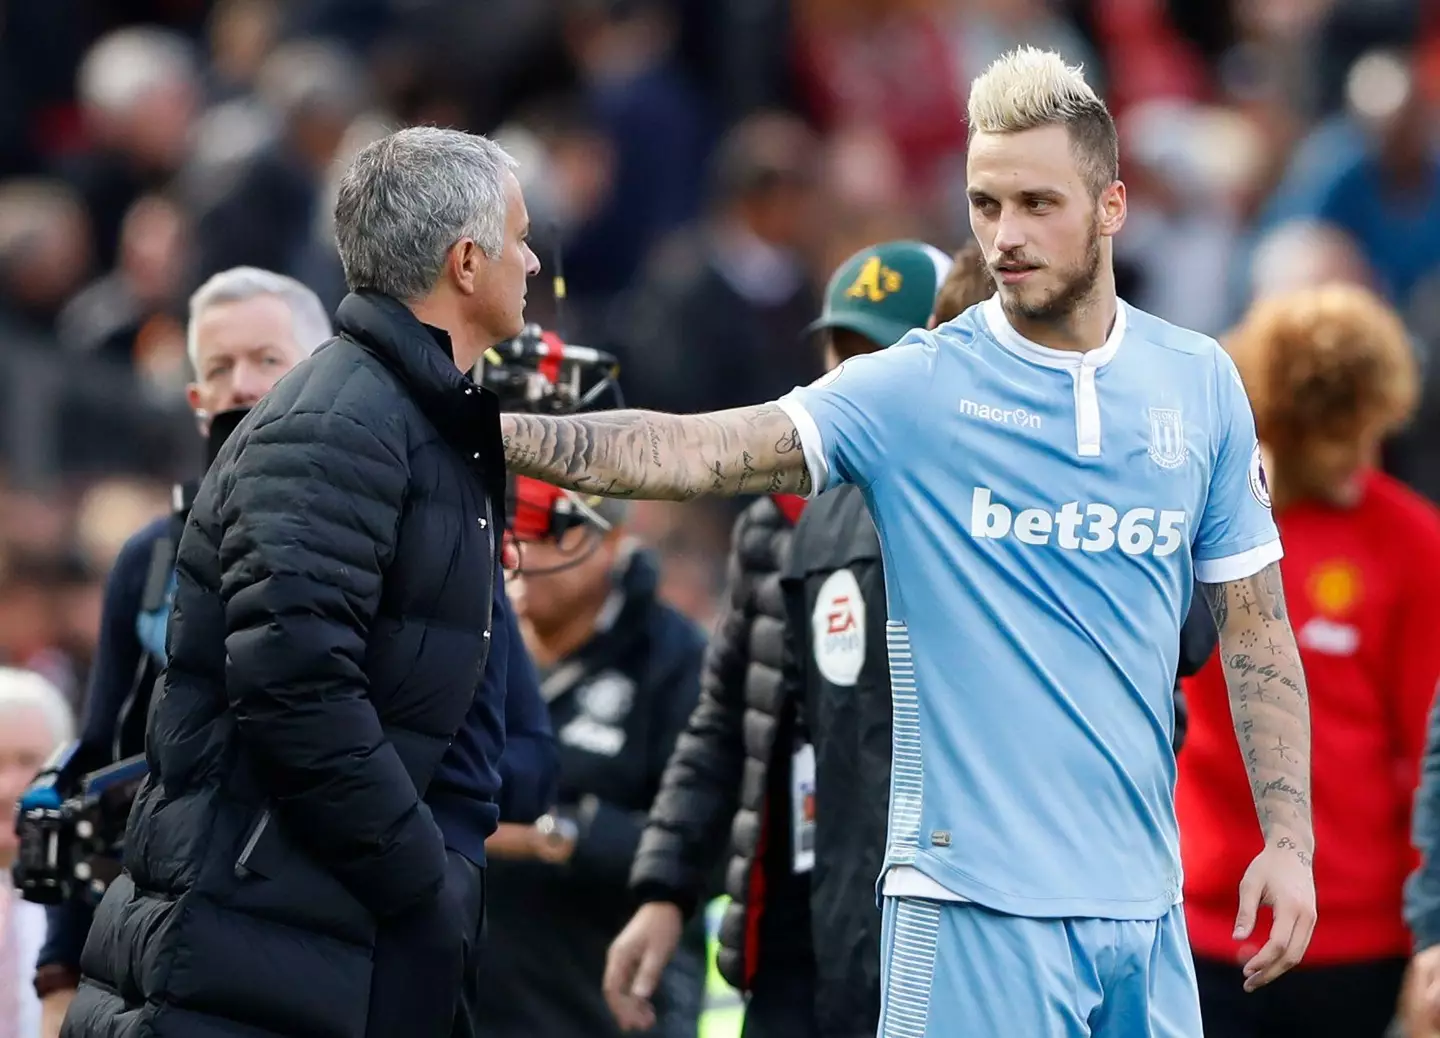 Arnautovic and Mourinho embrace during their times at Stoke City and Manchester United. (